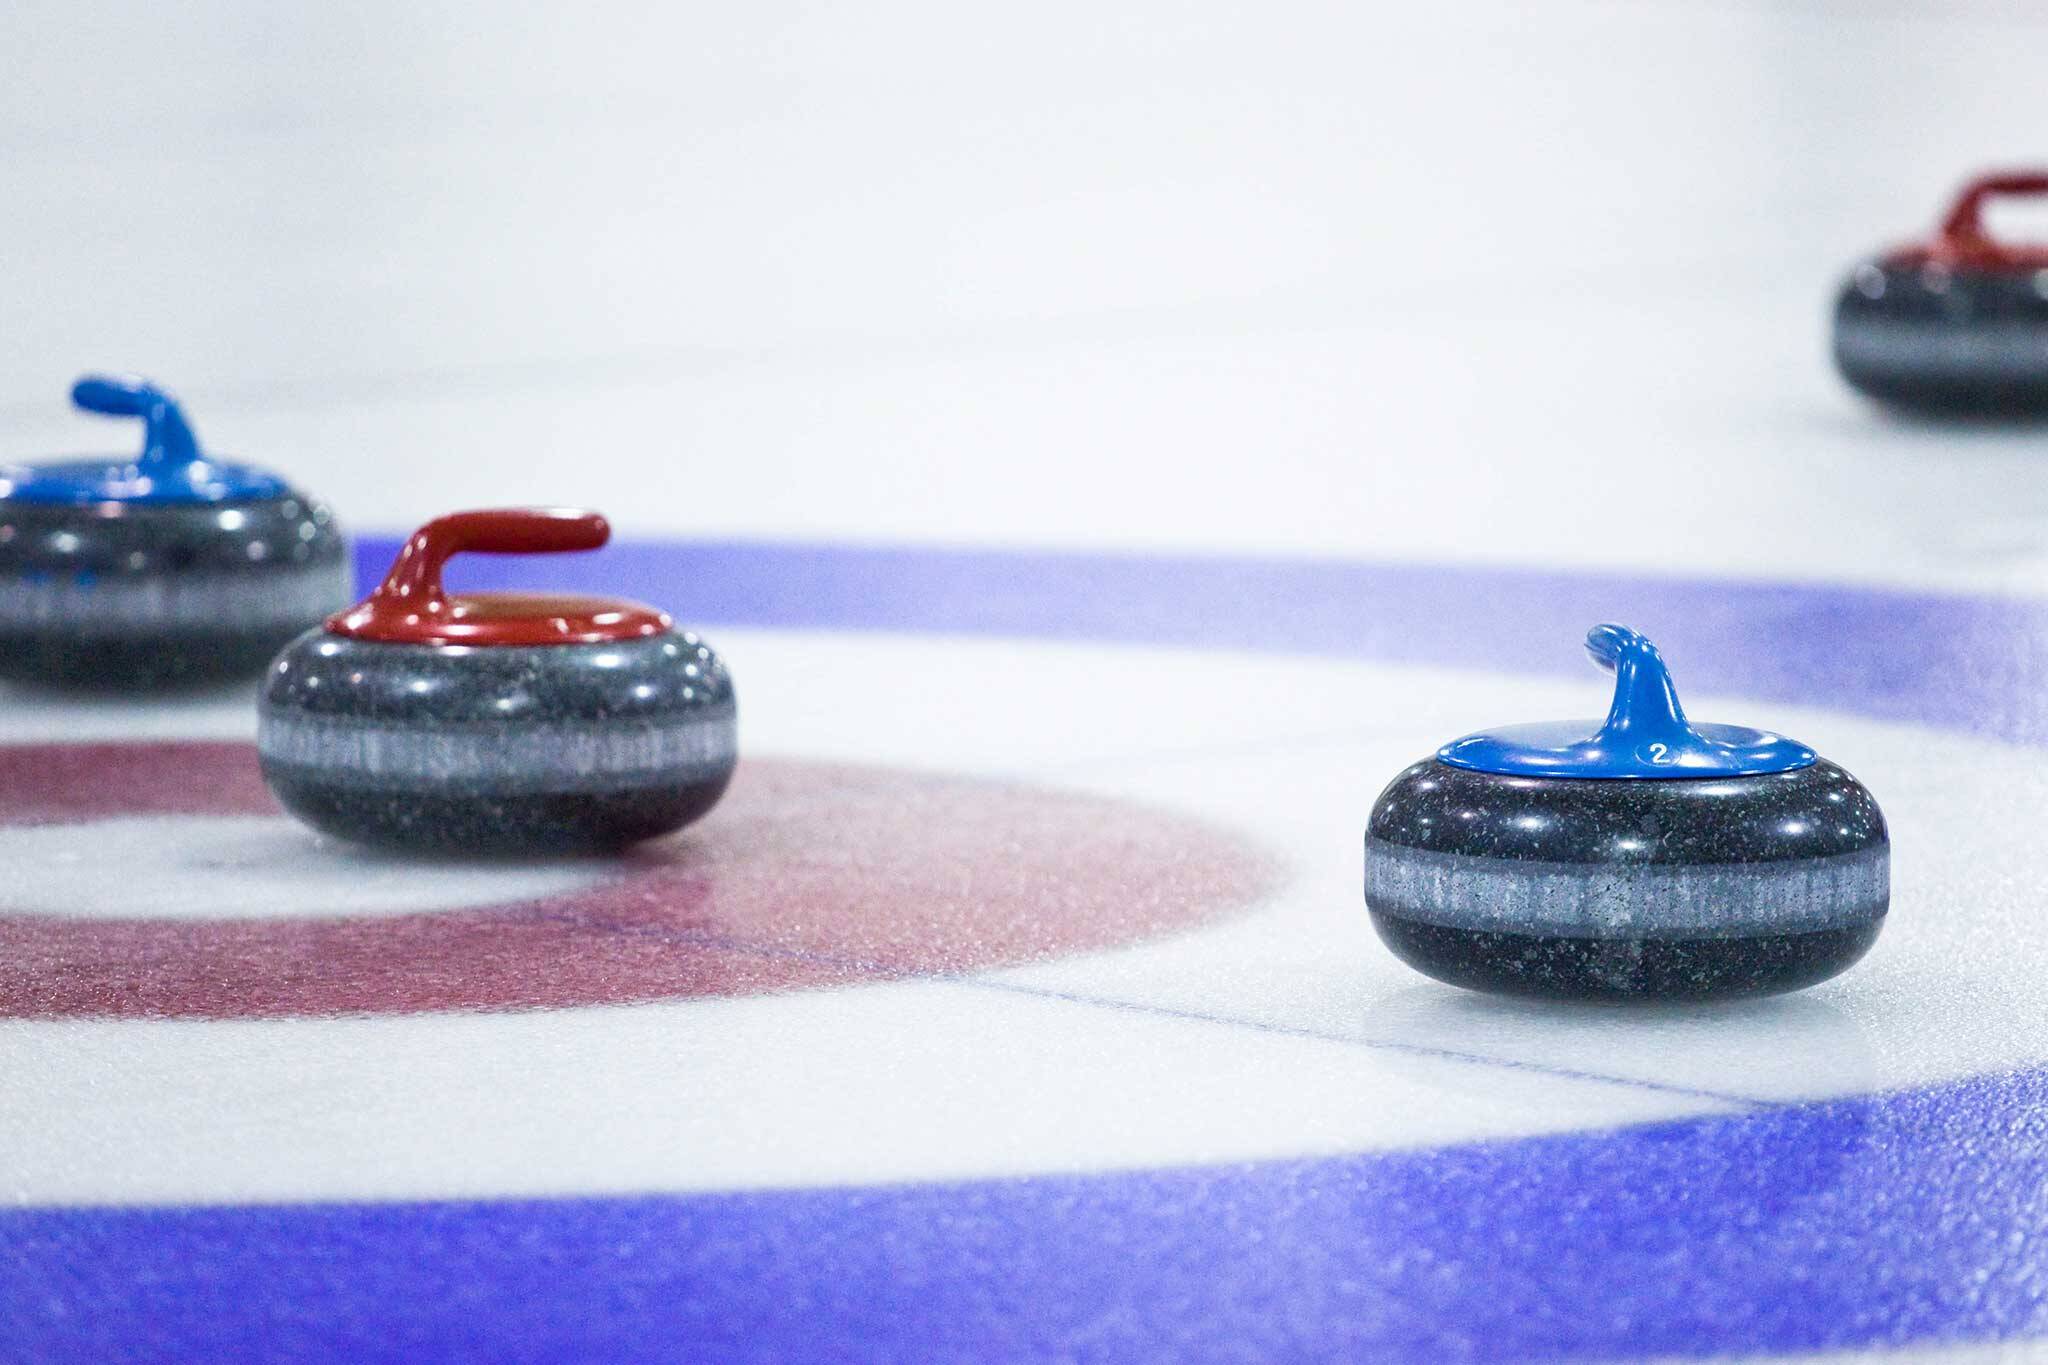 Curling clubs in Toronto